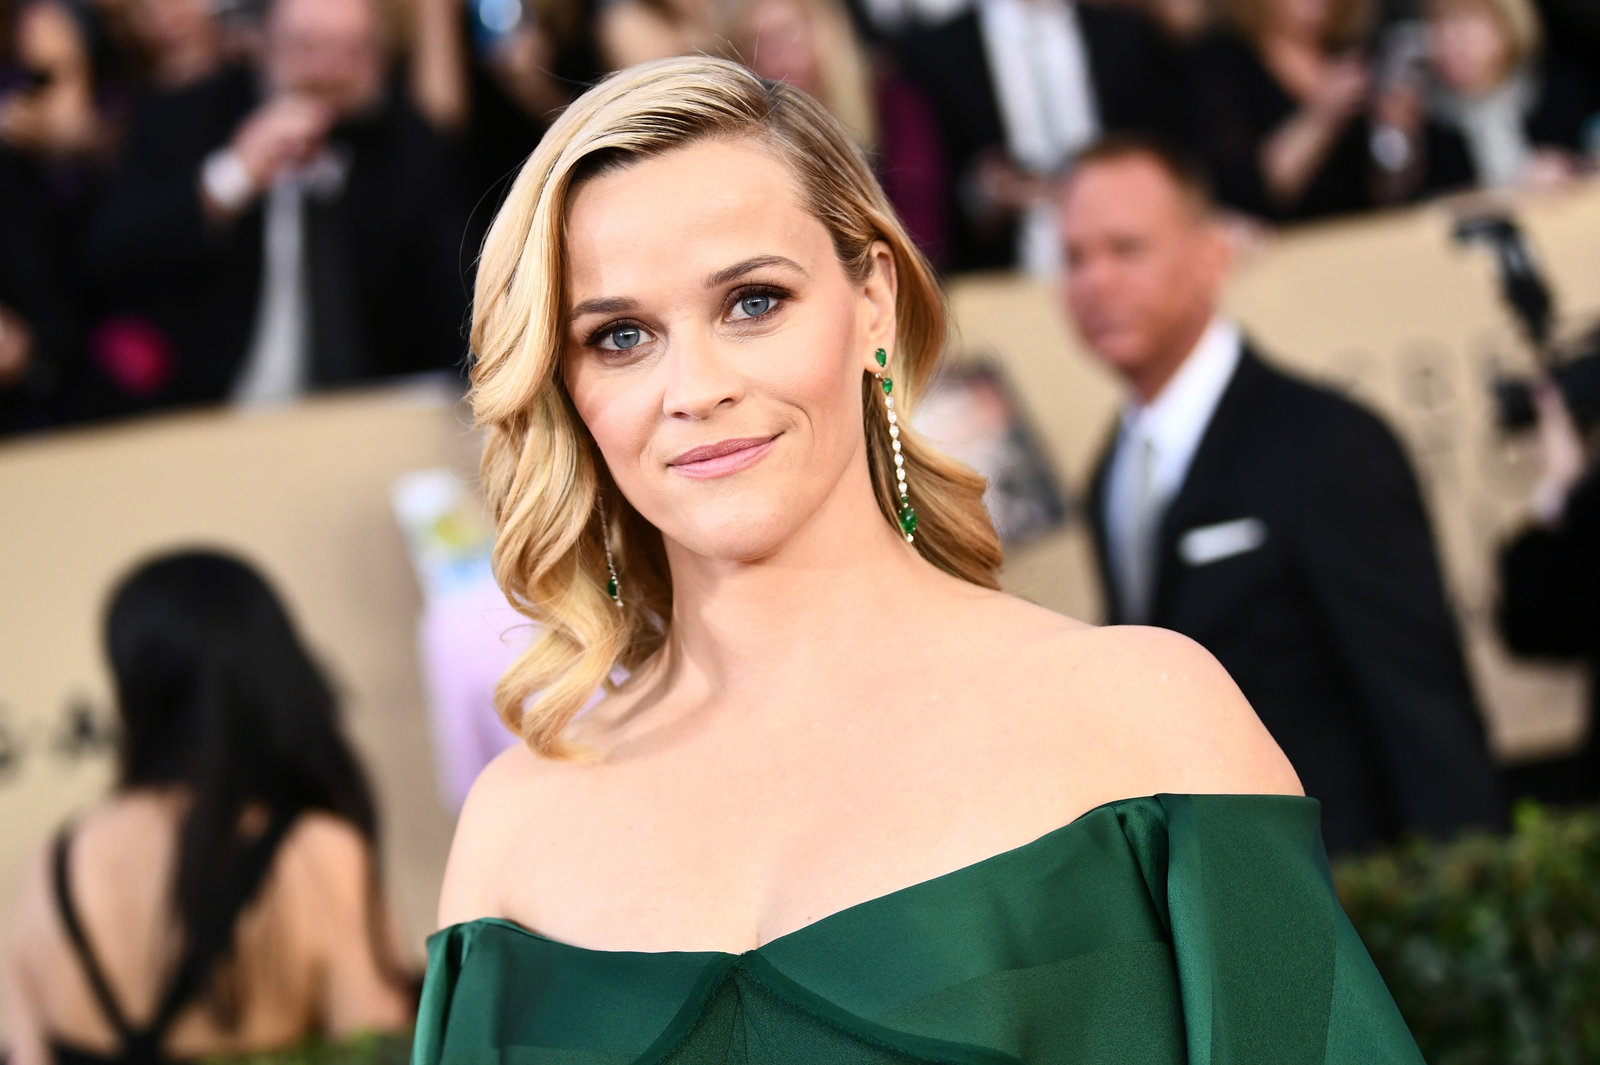 Reese Witherspoon; Credit: Emma McIntyre/Getty Images for Turner Image